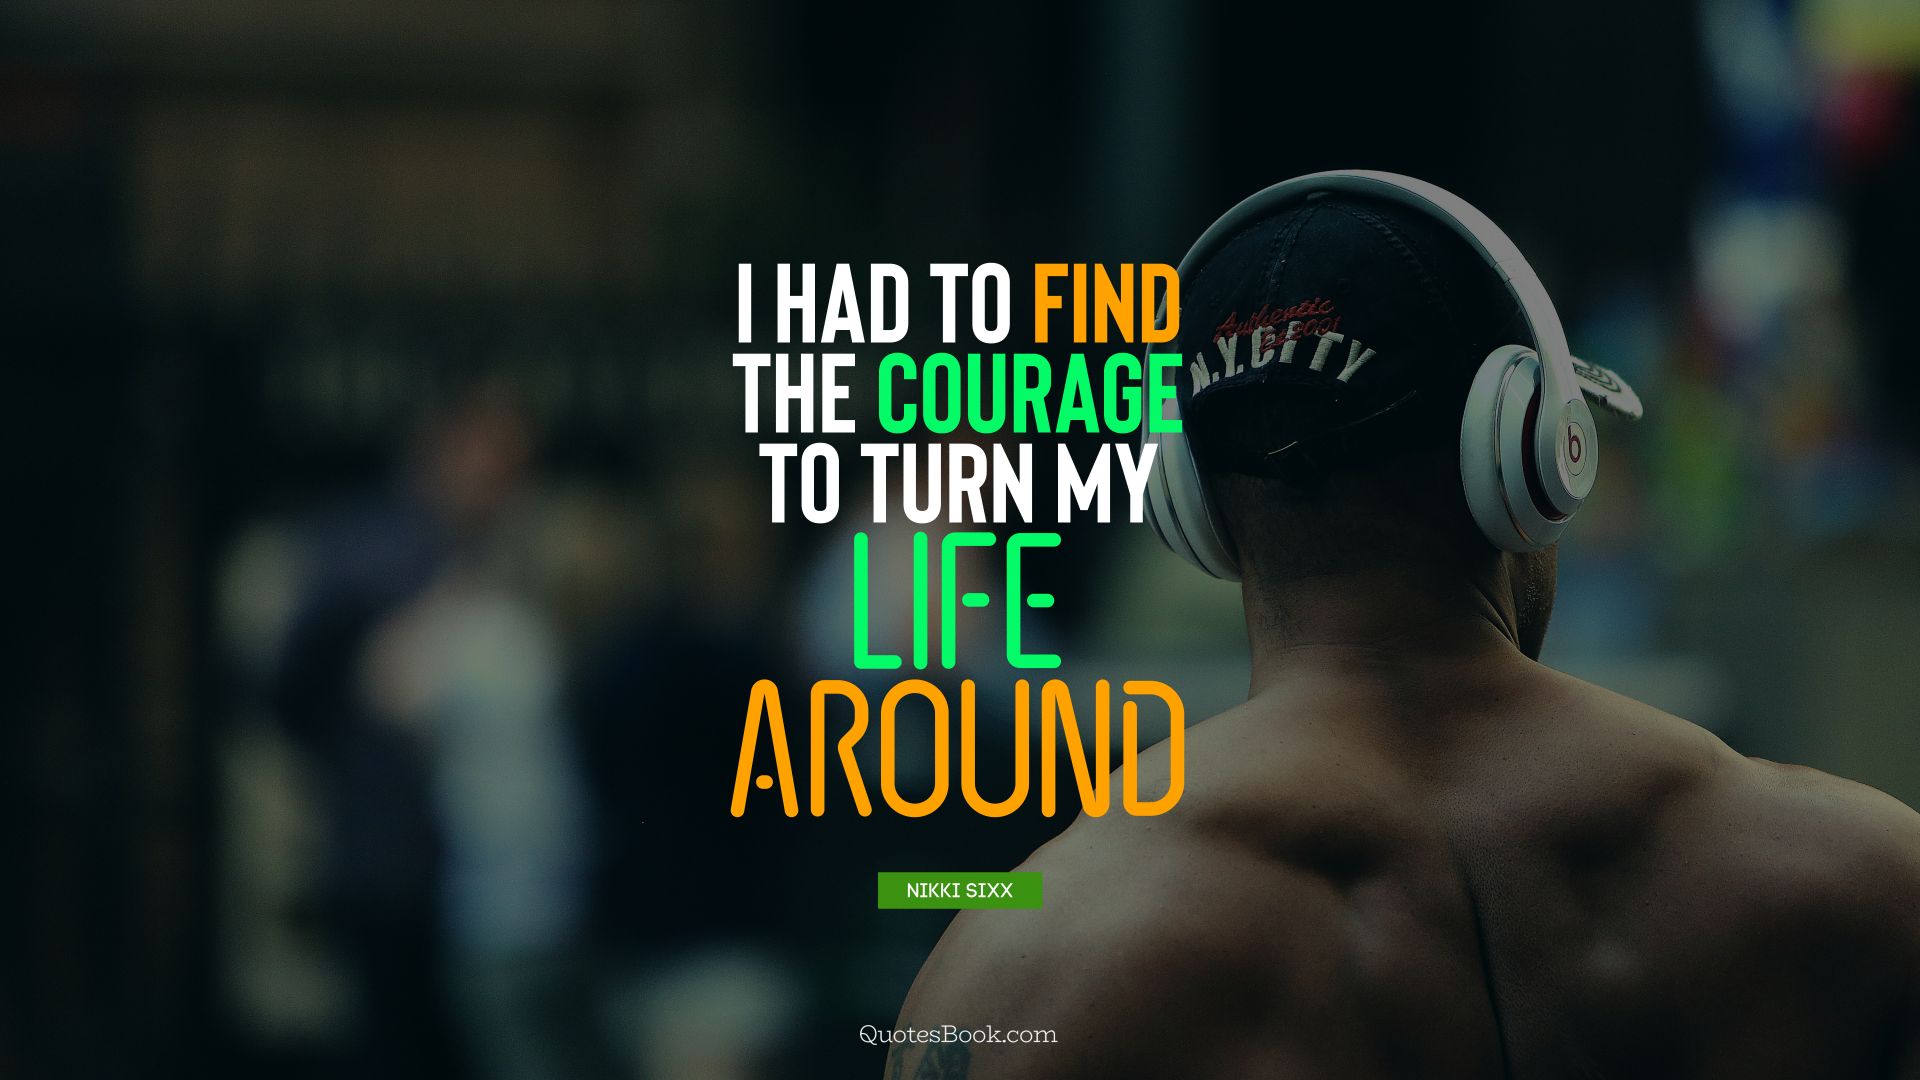 I had to find the courage to turn my life around. - Quote by Nikki Sixx